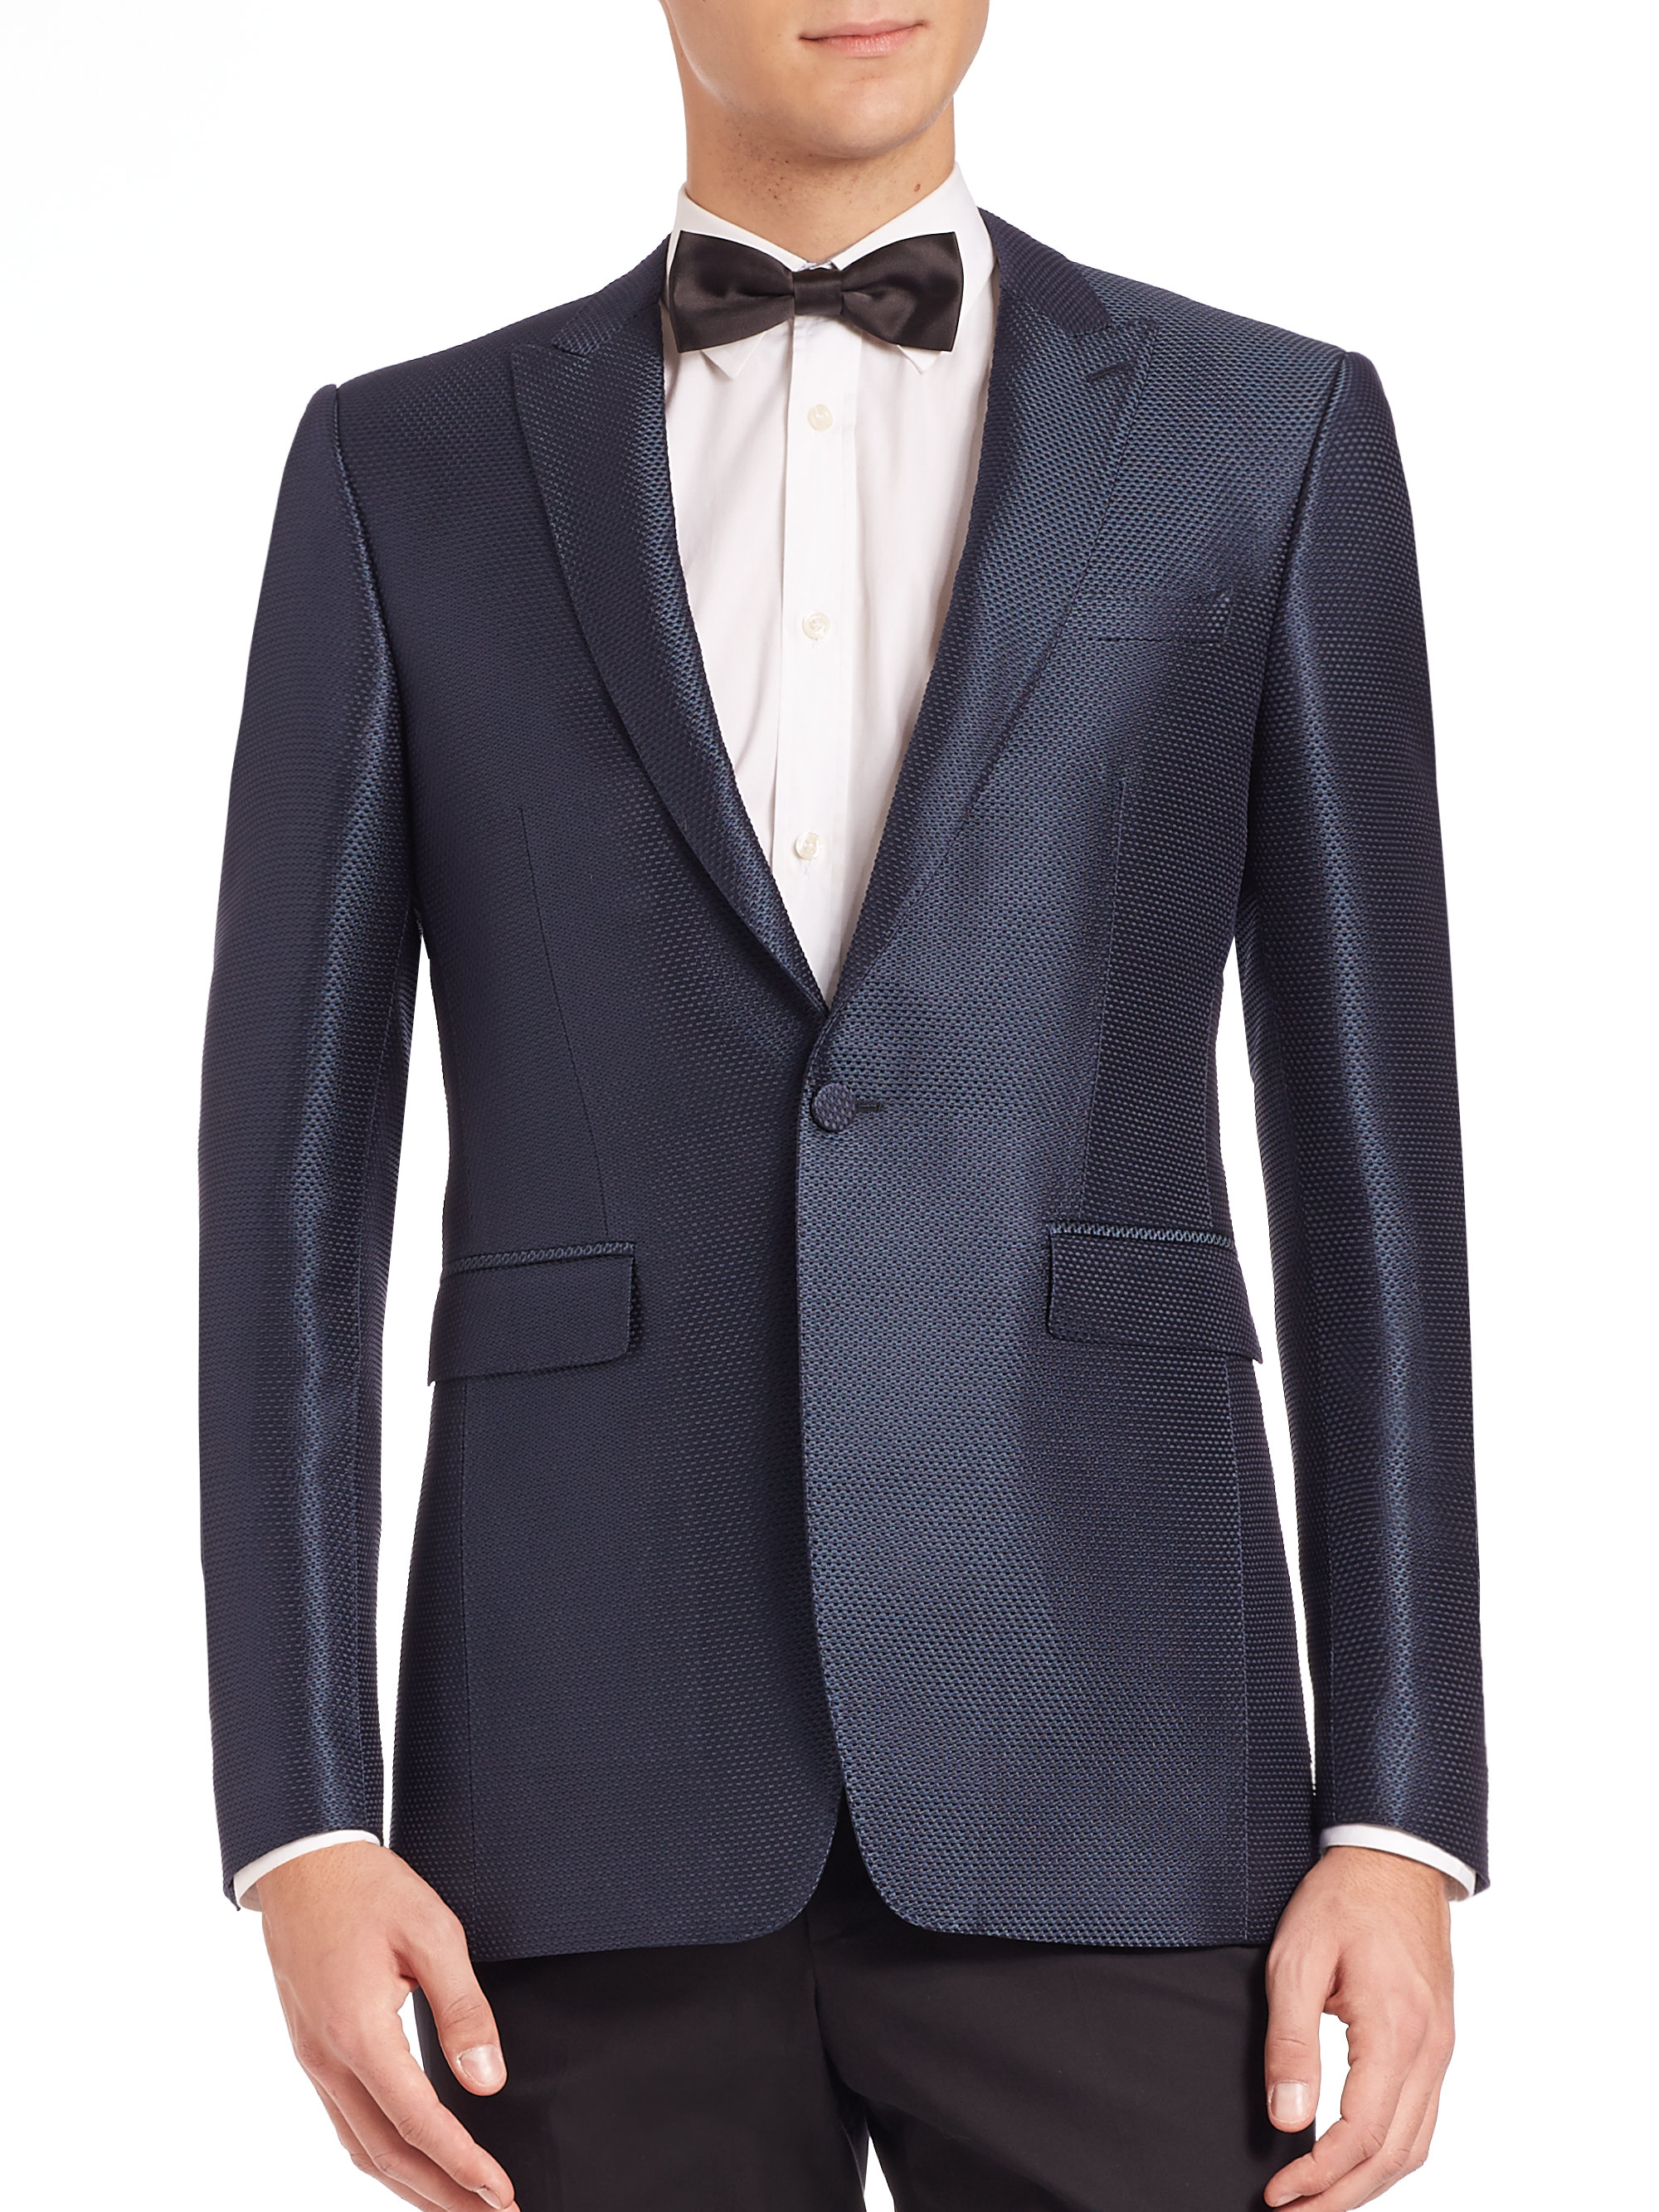 Lyst - Burberry Latham Silk Jacquard Jacket in Blue for Men